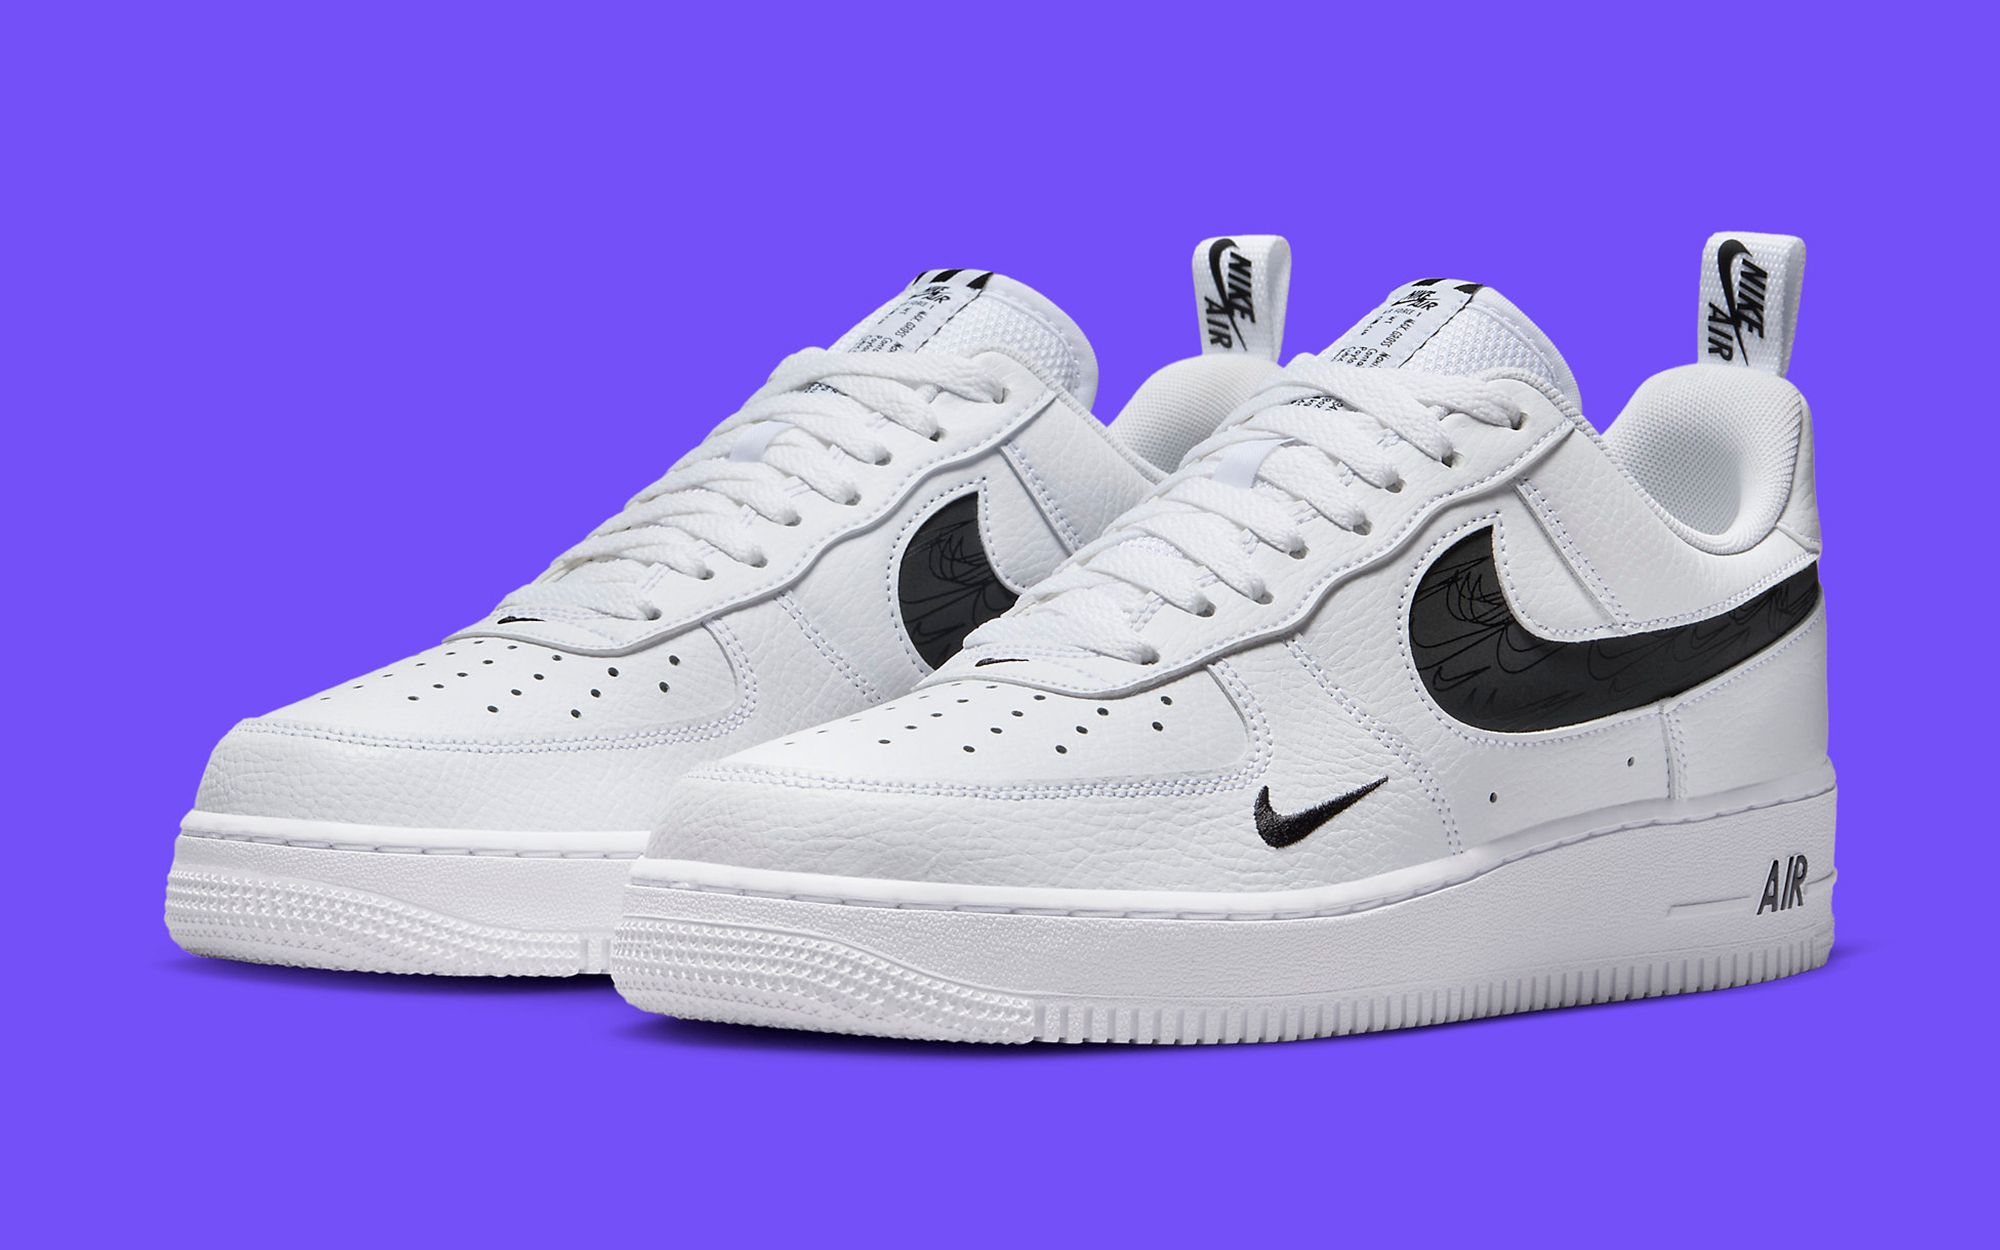 Nike Air Force 1 Reflective Swoosh: Release Info